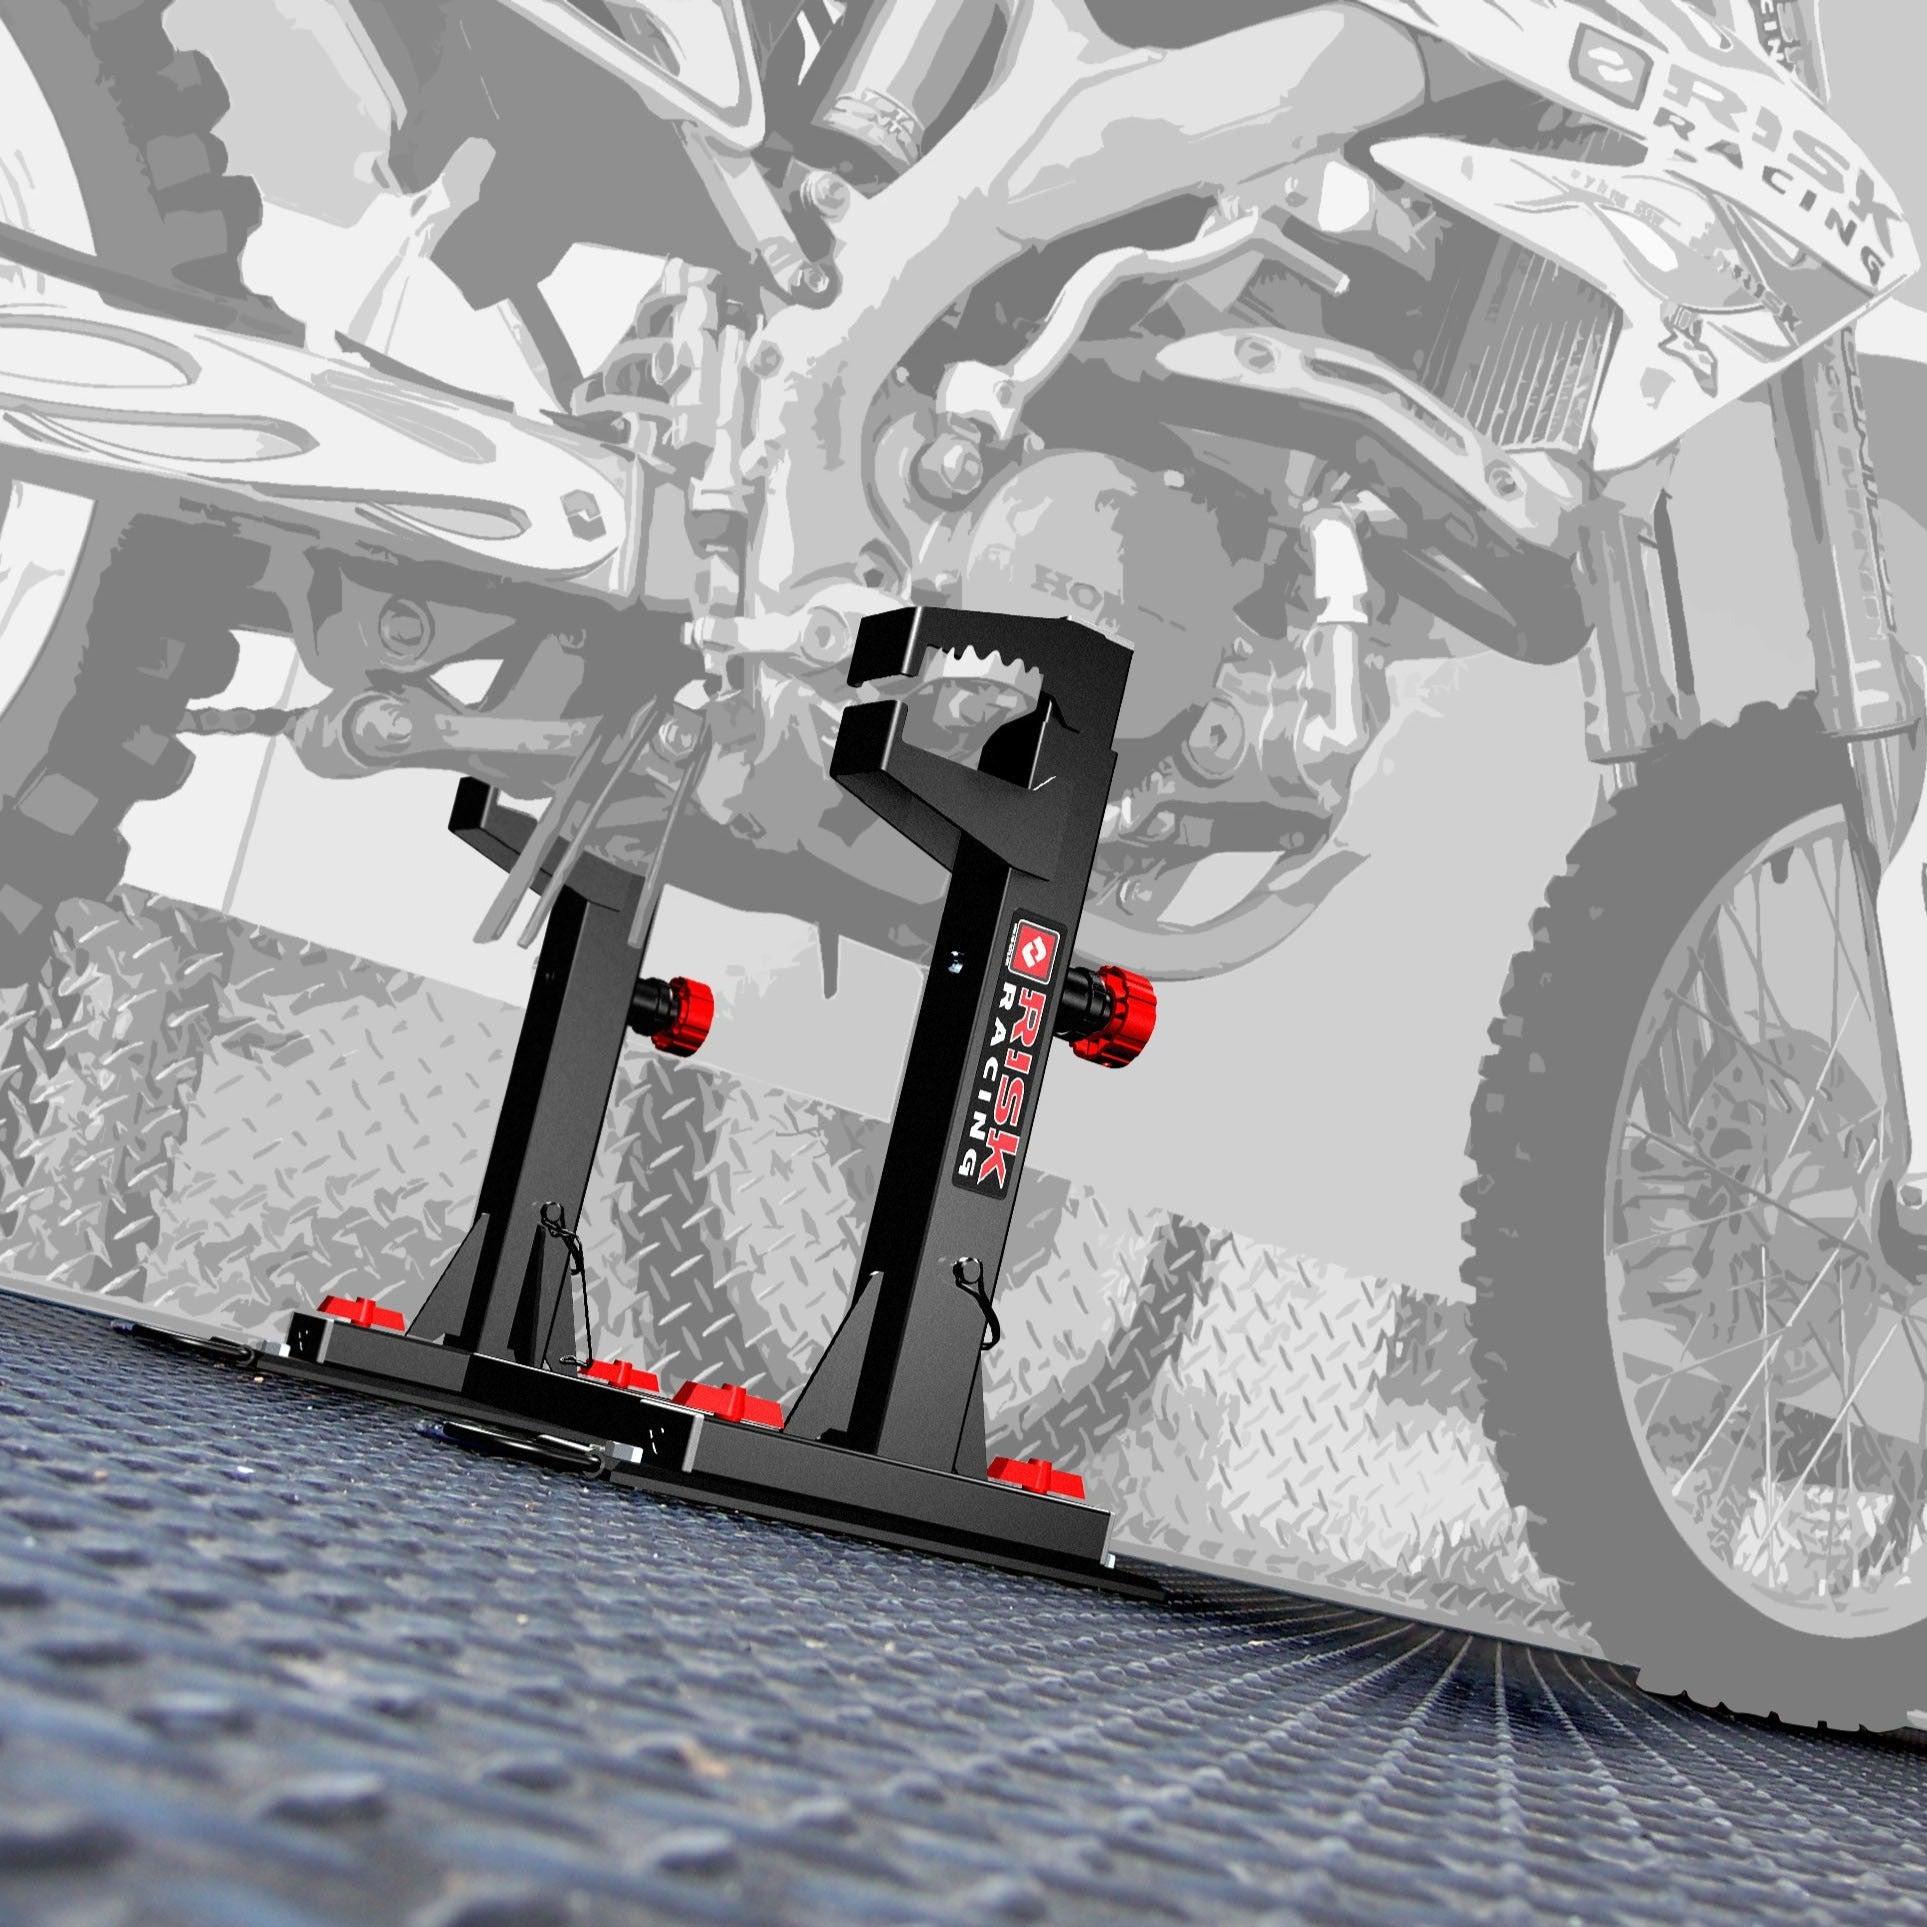 Risk Racing - Lock-N-Load - Moto Transport System. No straps needed to transport your dirtbike